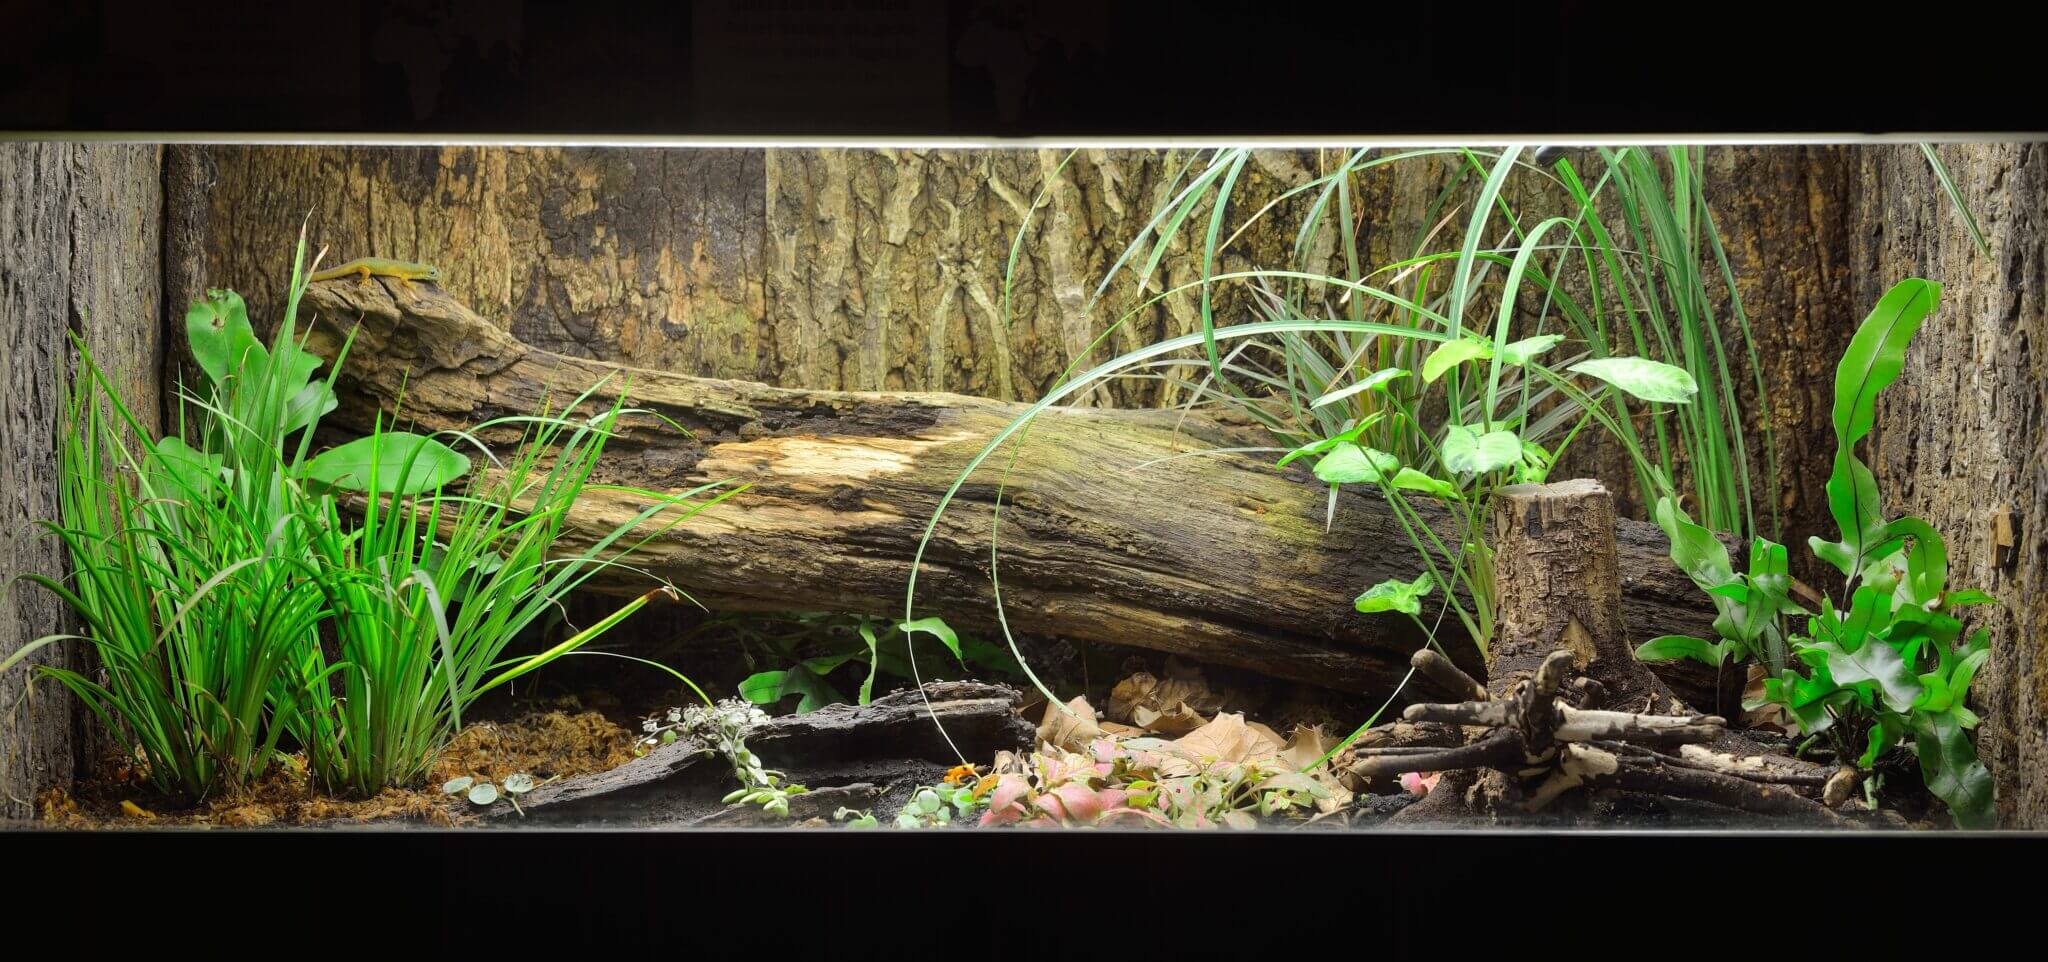 tropical-environment-terrarium-layout-with-exotic-greens-and-a-log